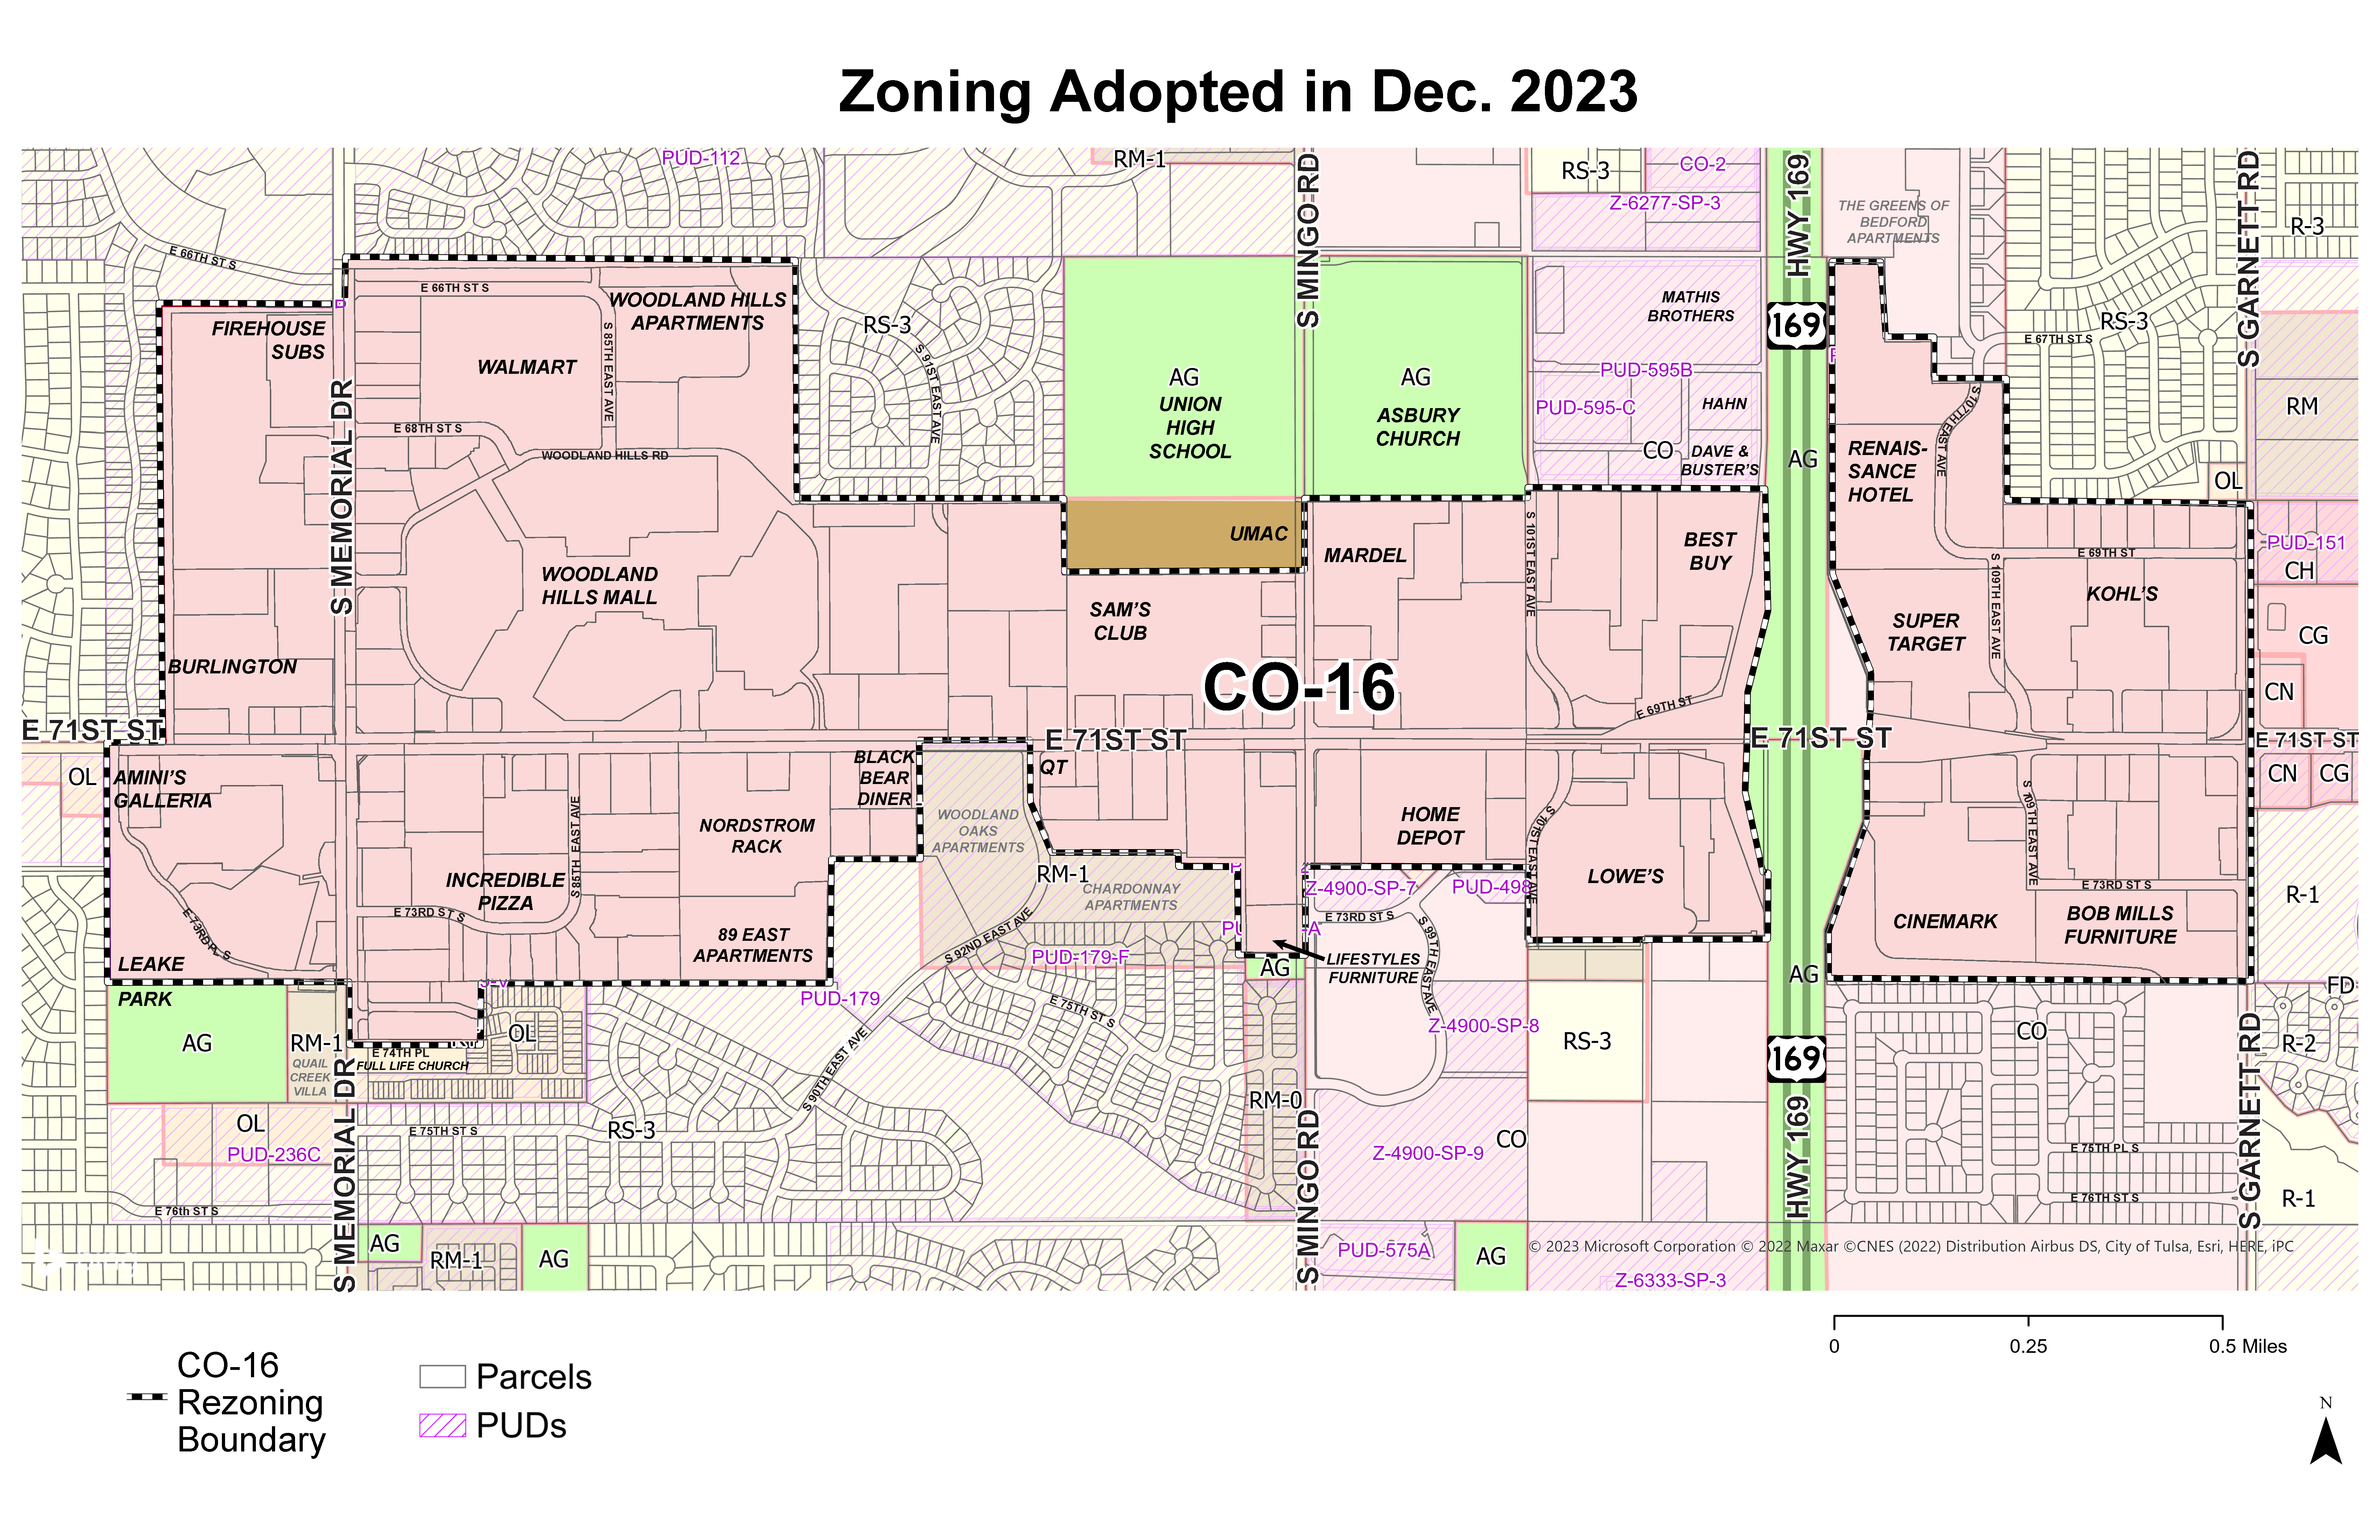 Map of Zoning along 71st Street Corridor adopted in December 2023